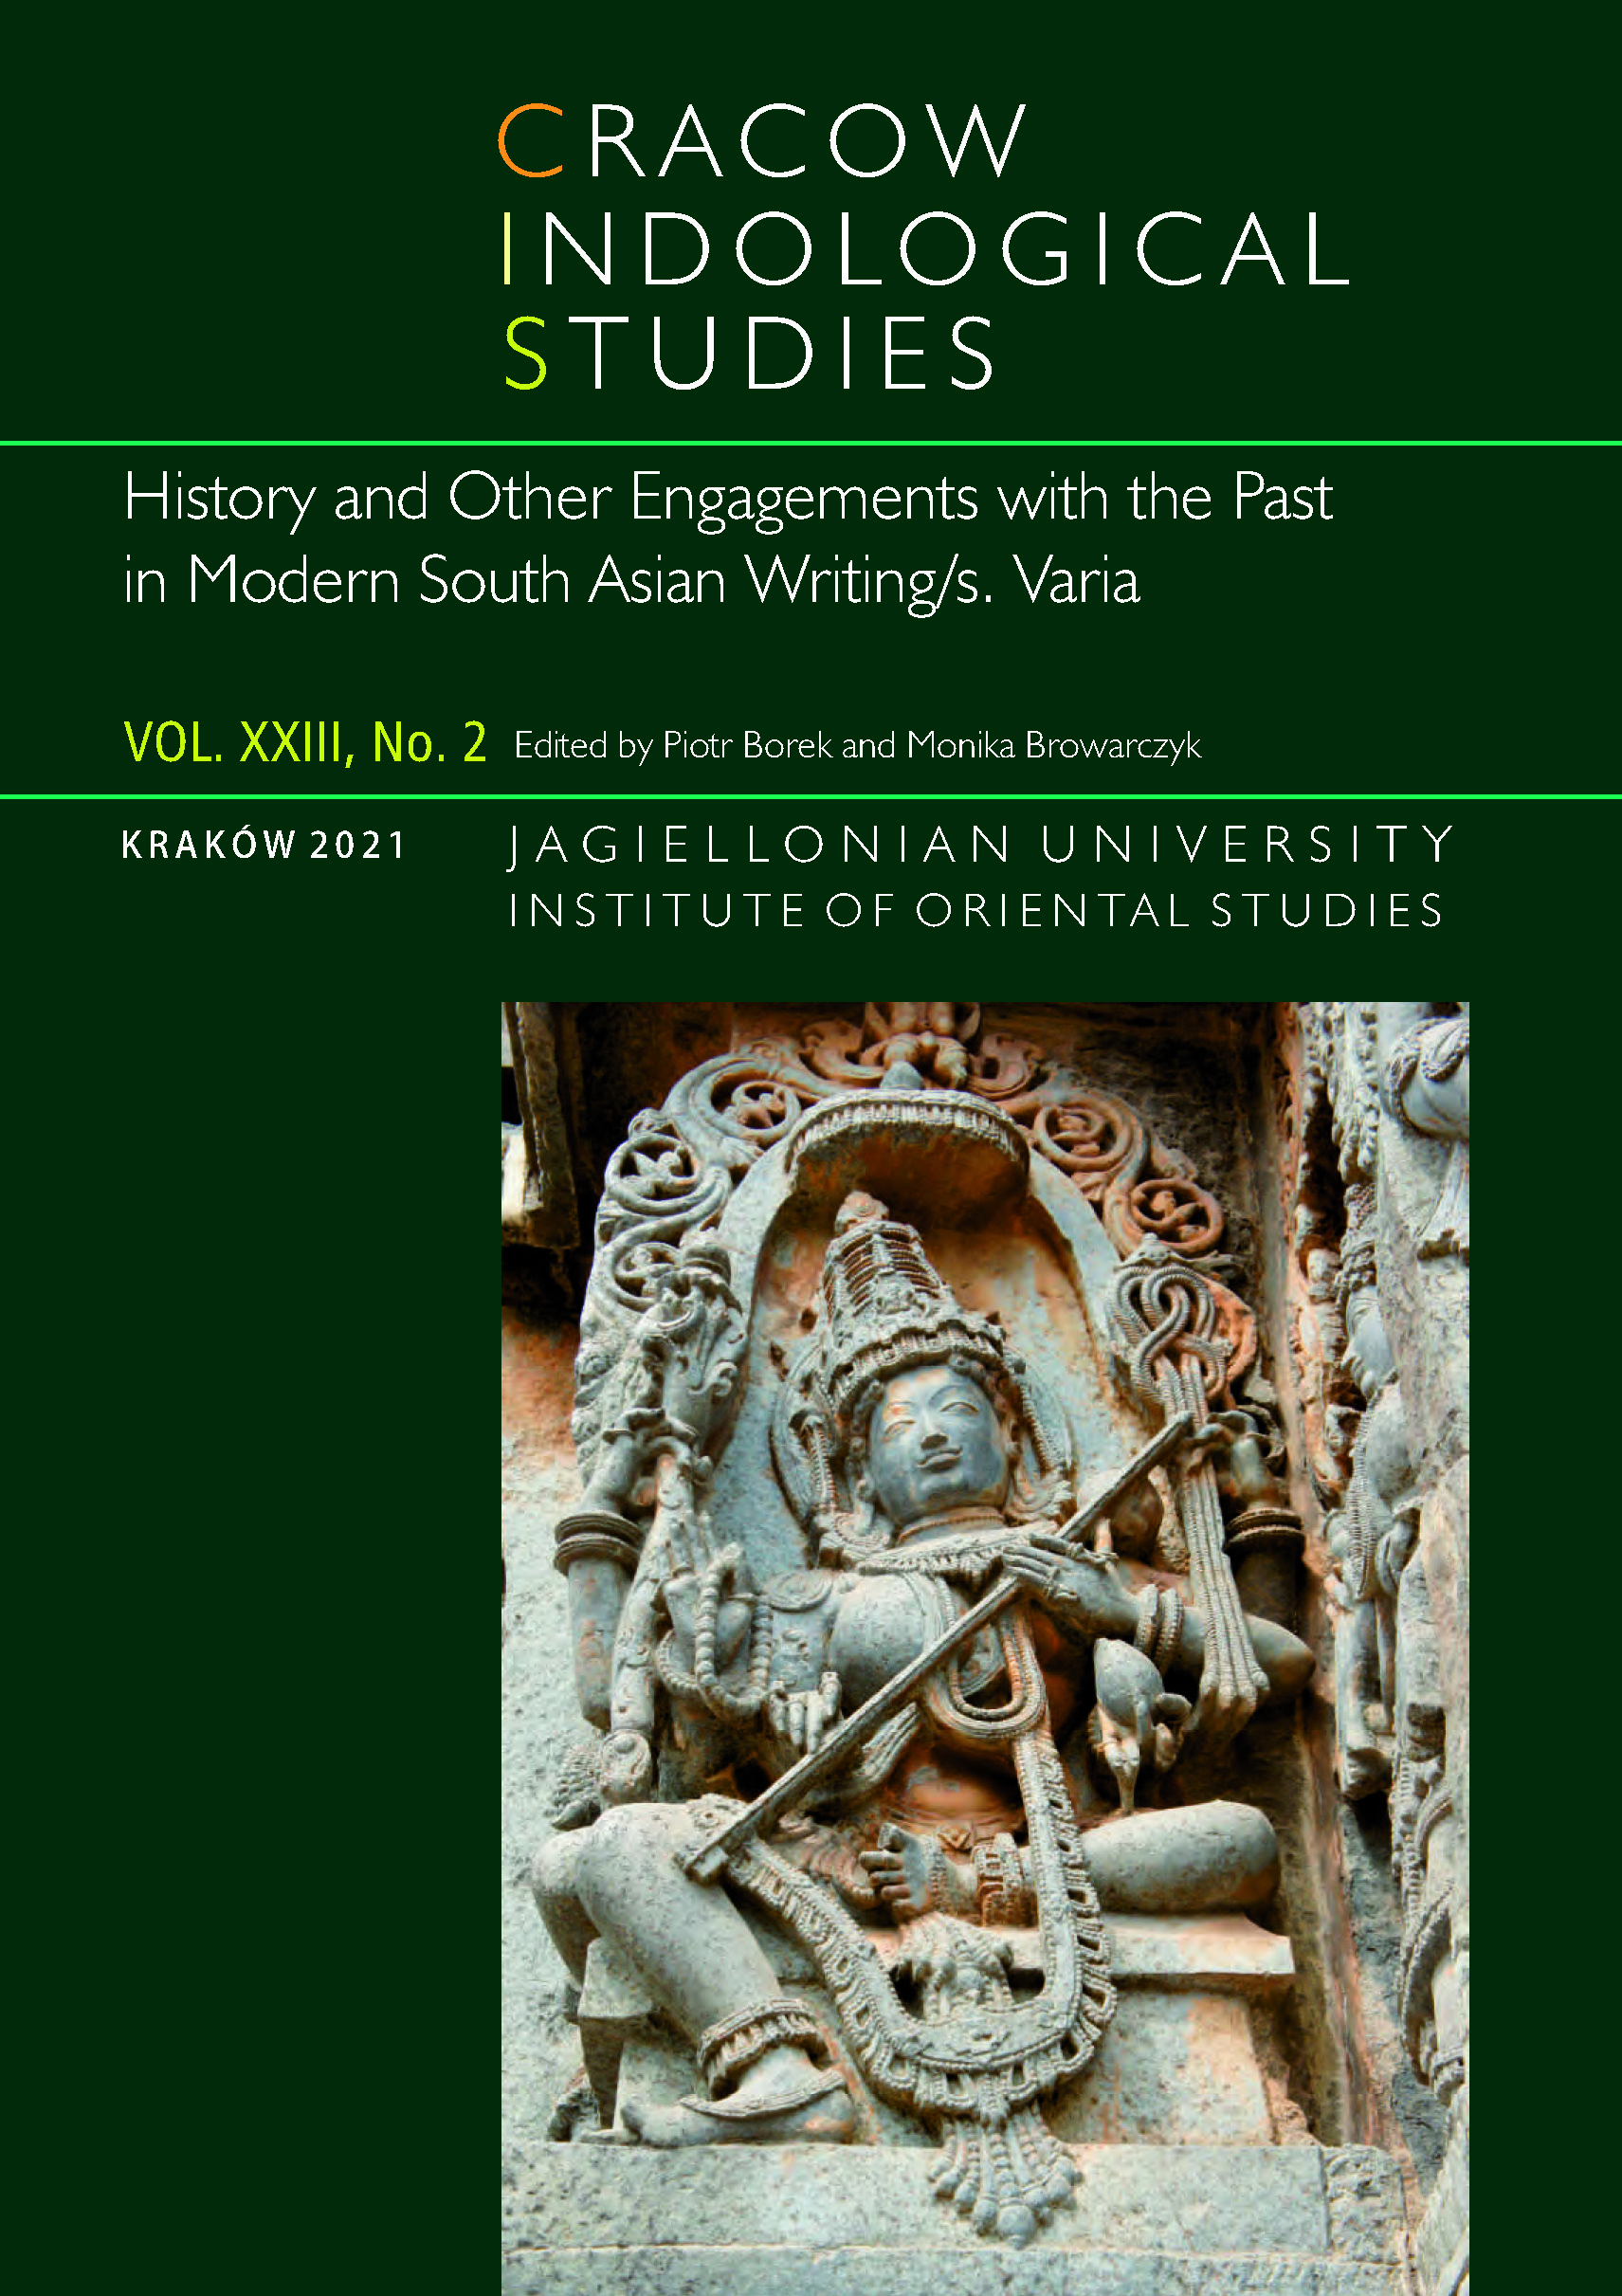 					View Vol. 23 No. 2 (2021): History and Other Engagements with the Past in Modern South Asian Writing/s. Varia
				